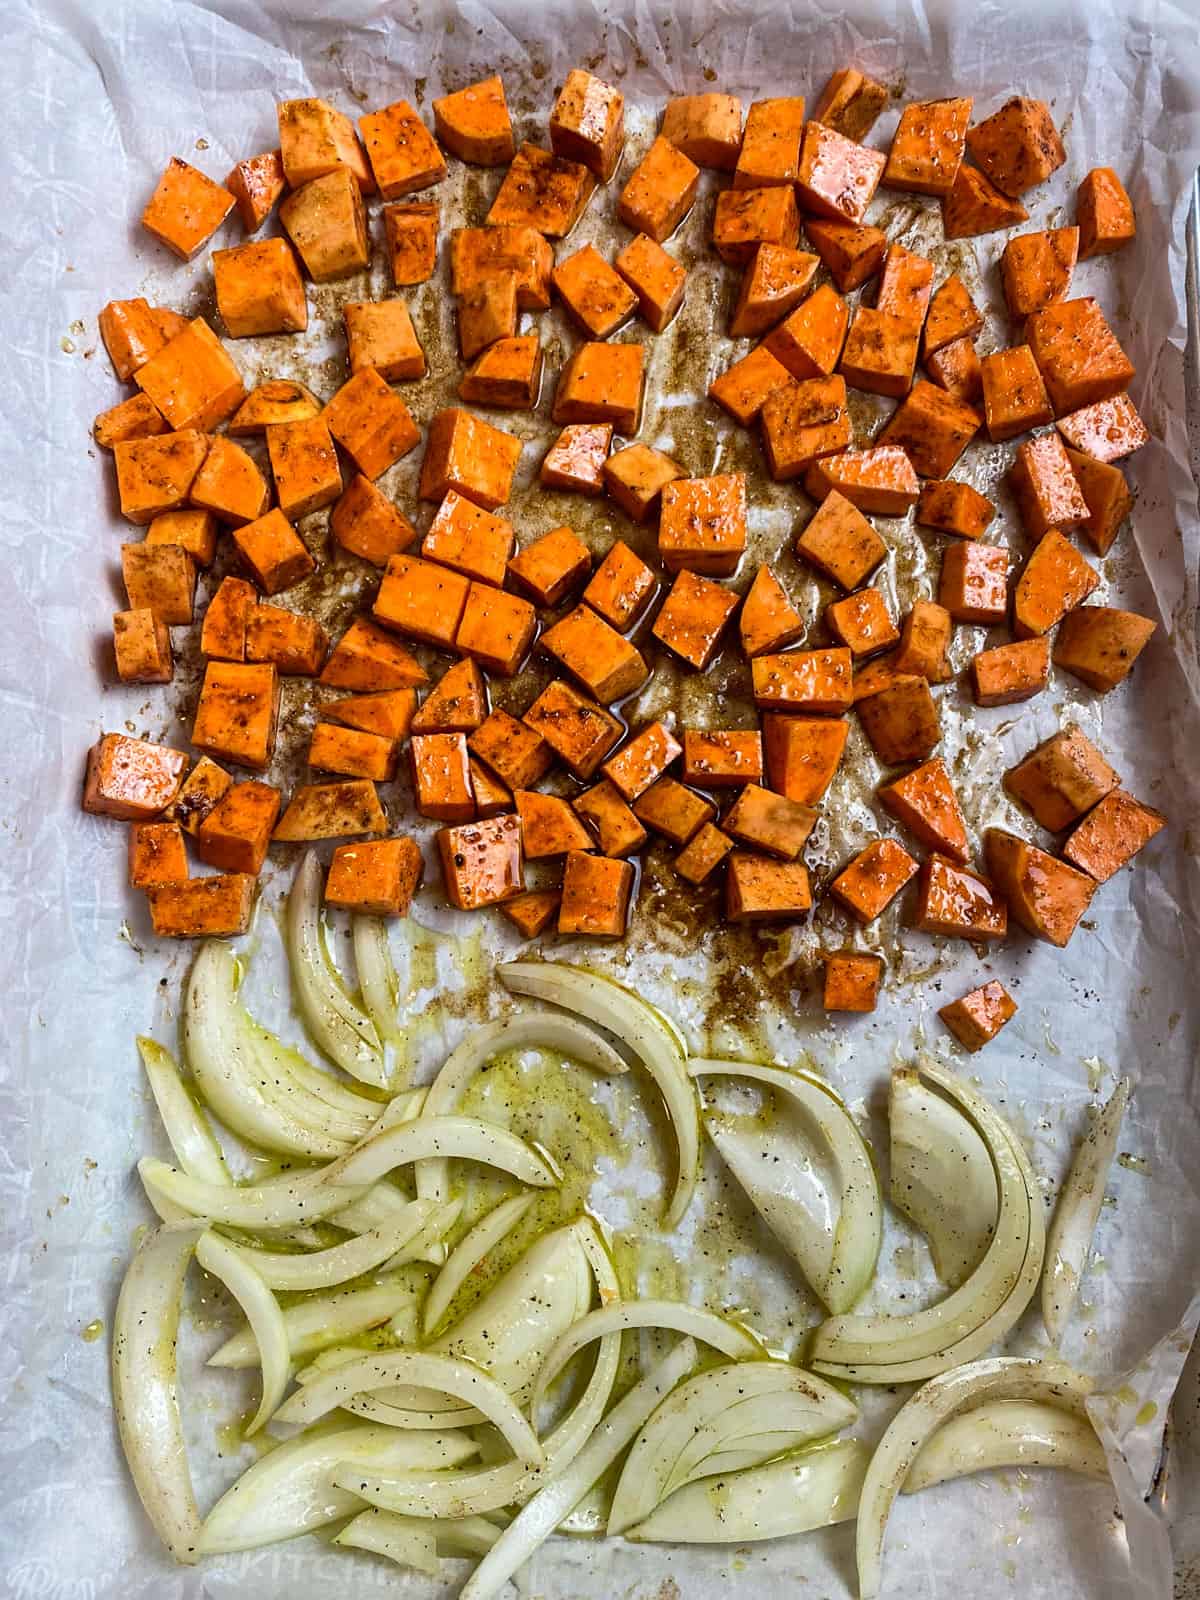 Cubed sweet potato and onion slices are seasoned with cinnamon and maple syrup before being roasted.